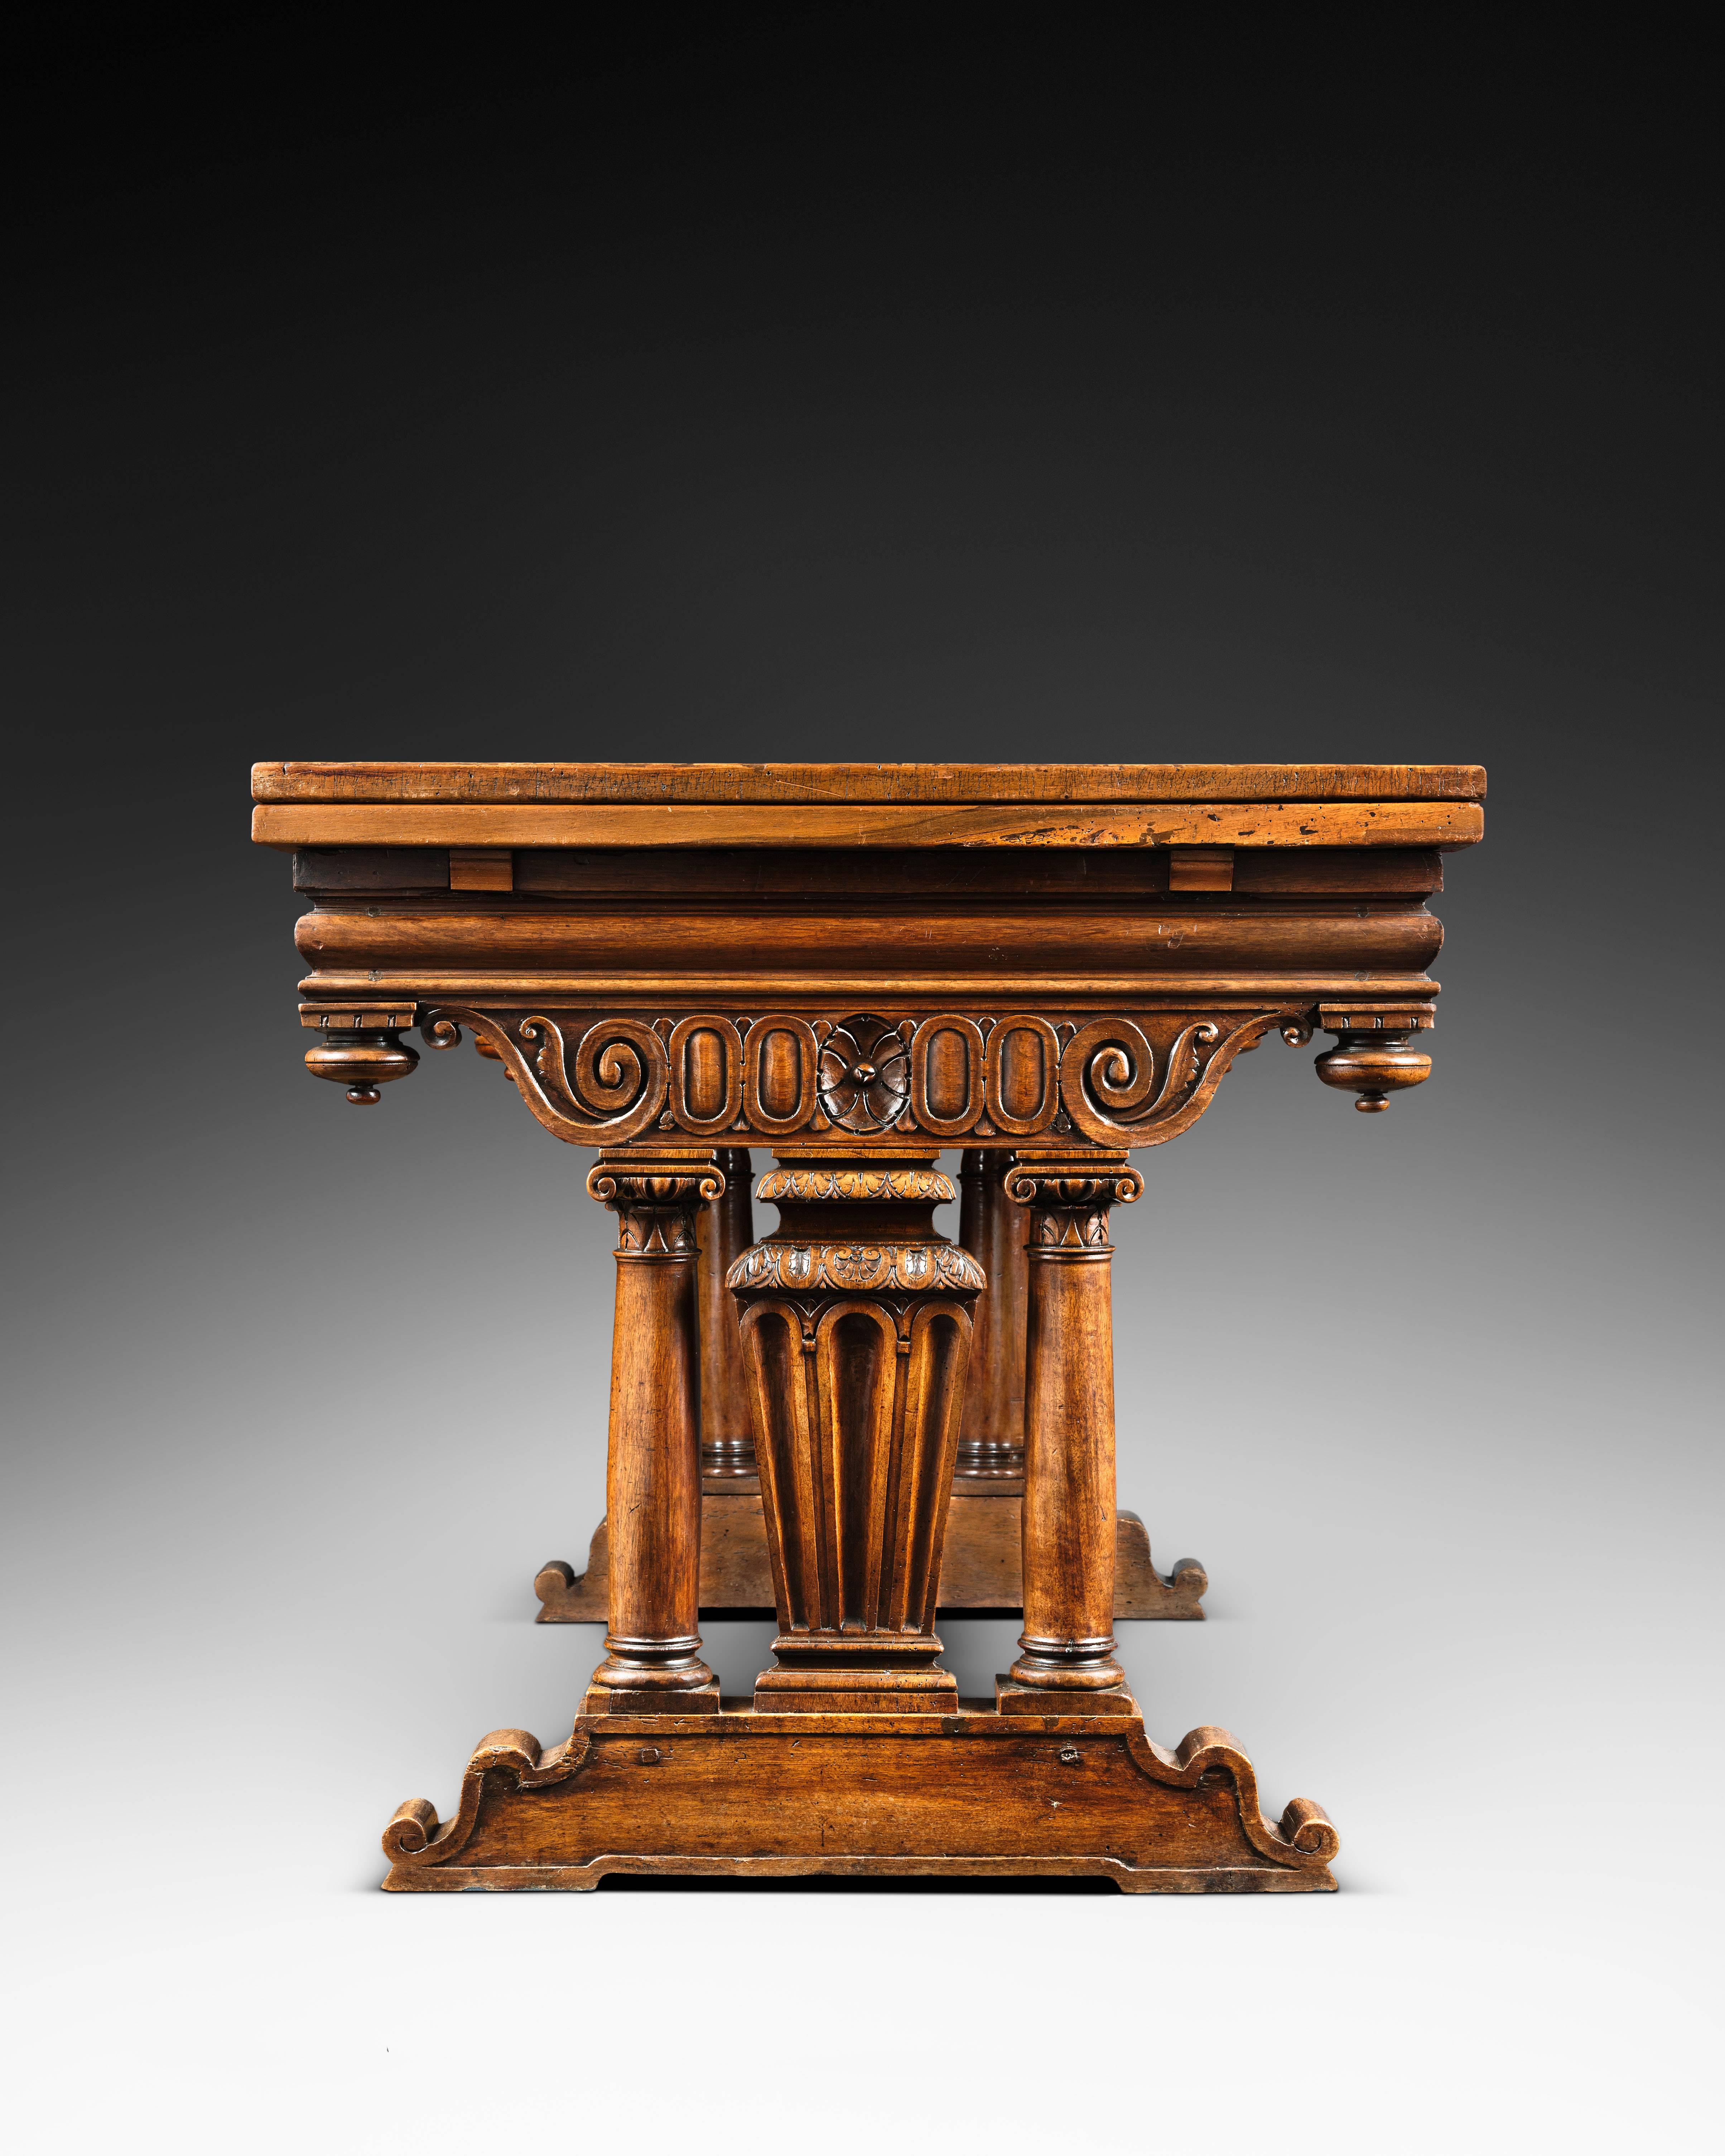 Origin: France, Burgundy
Date: Late 16th century, 1560-1580

Height : 83.5 cm 
Width : 160 cm, 282 cm once opened 
Depth : 89 cm 

Blond walnut wood, very fine grain

While lingered the medieval use of the table skate, Italy discovered again the